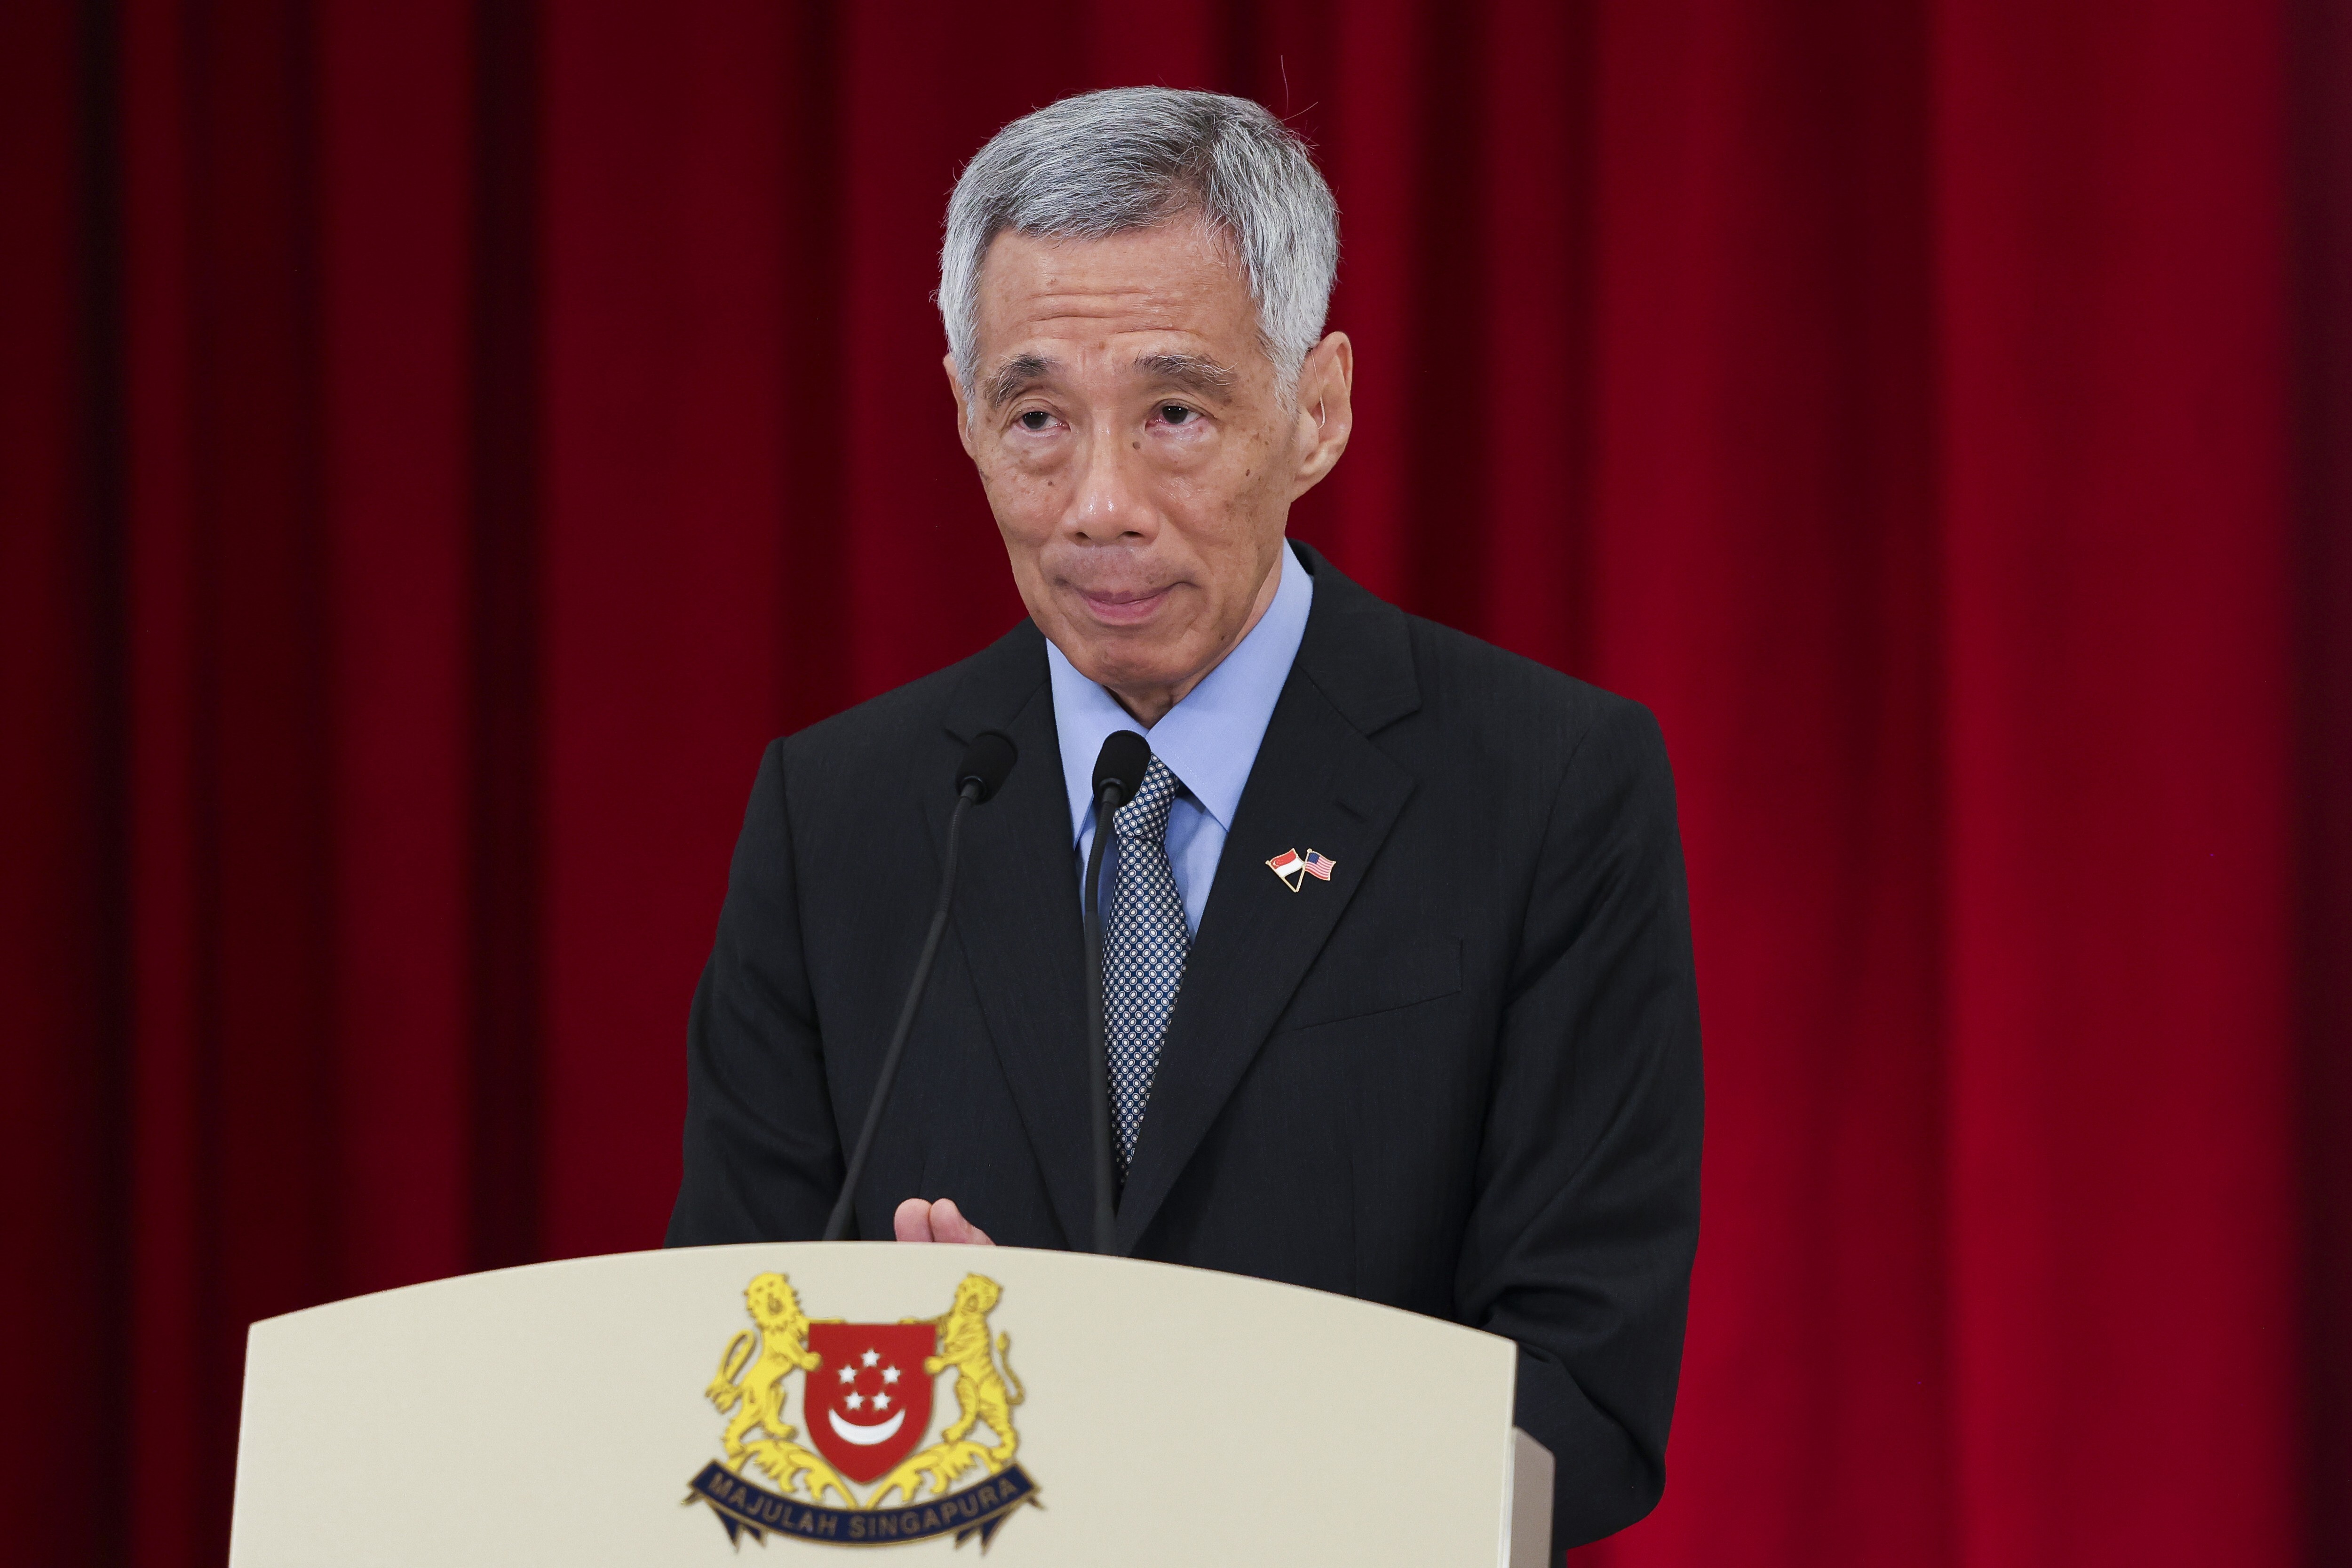 Singapore‘s Prime Minister Lee Hsien Loong pictured last month. Photo: AP